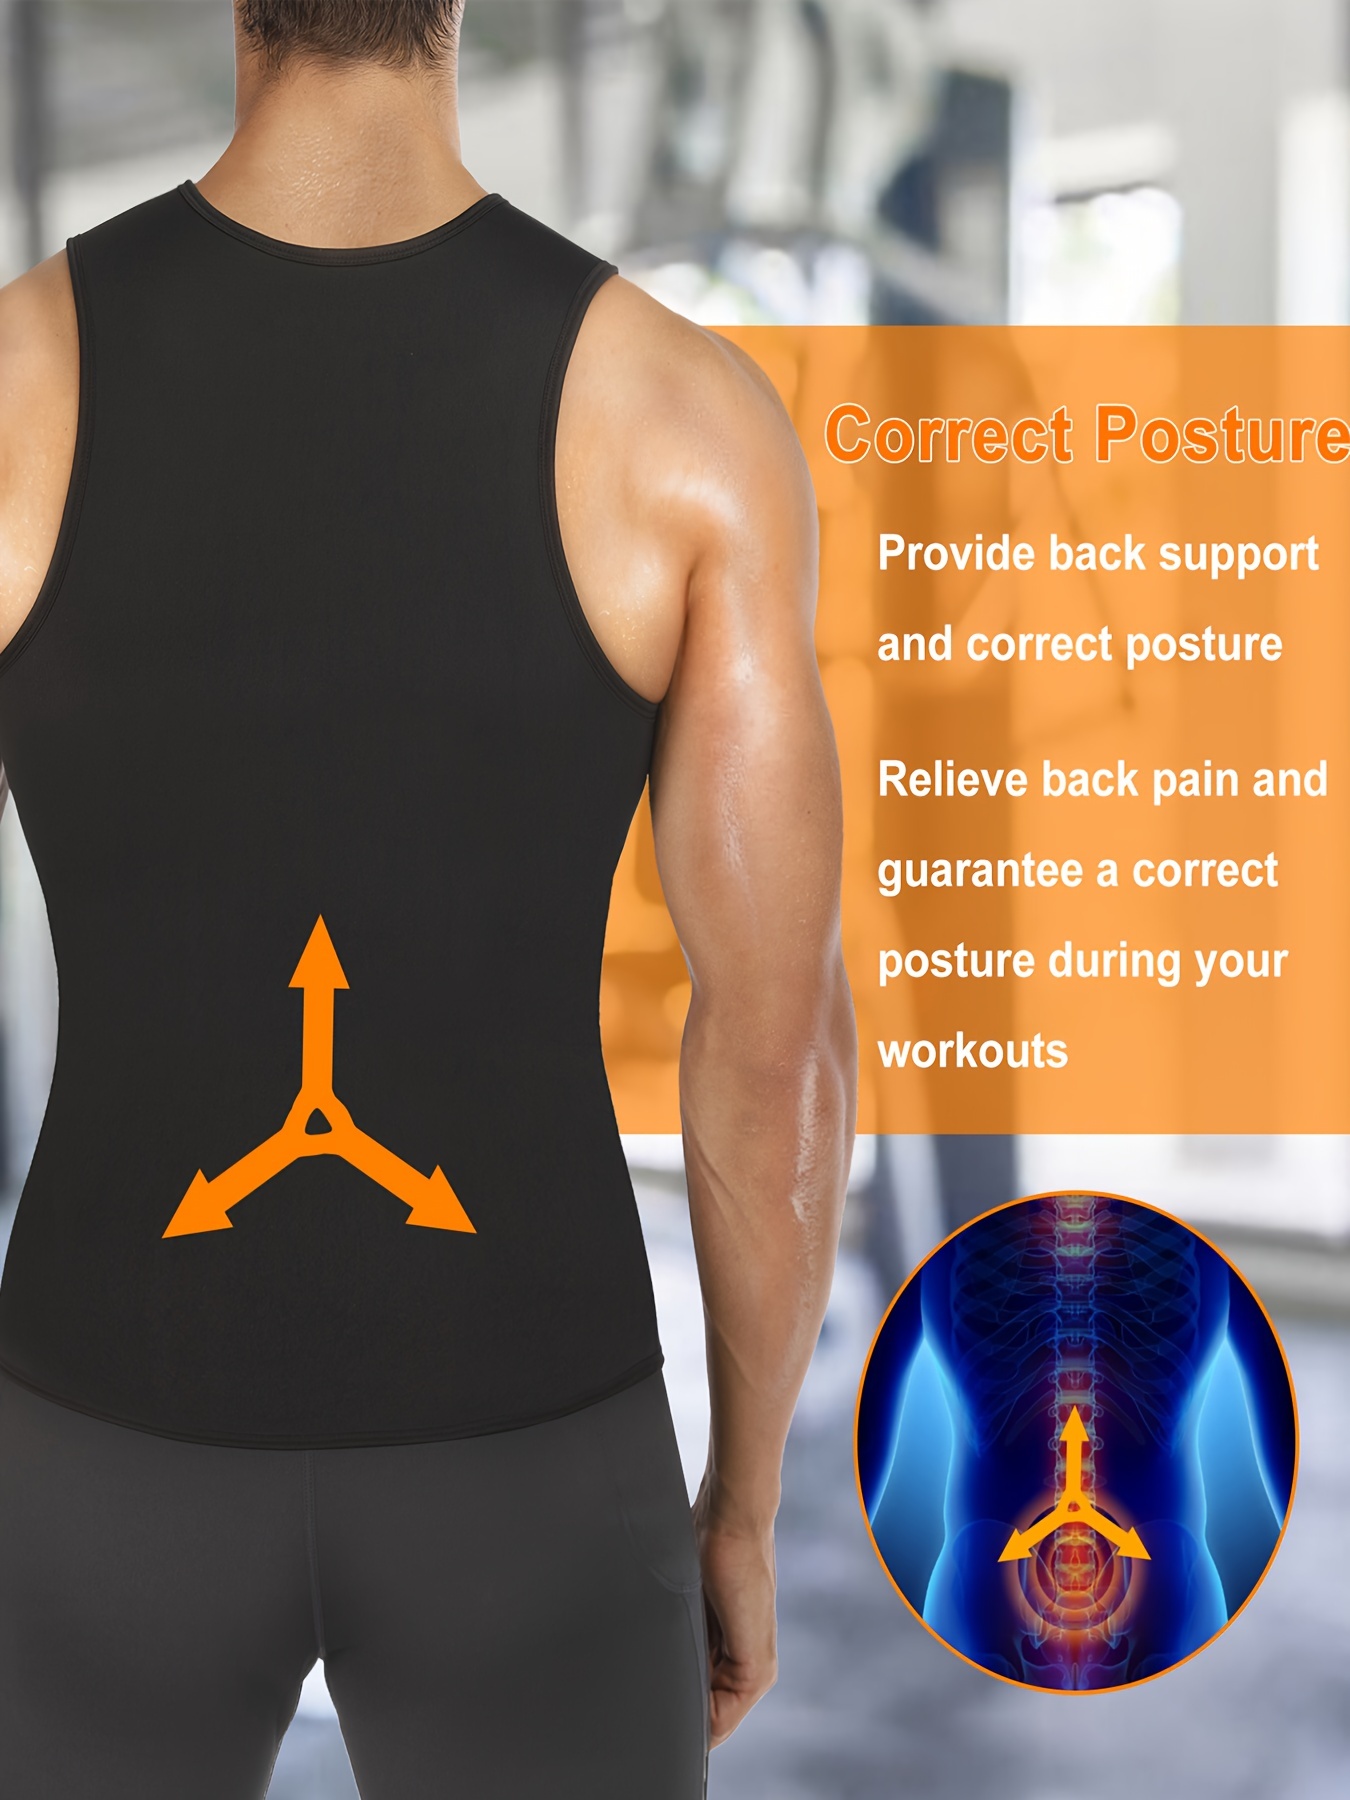 Cheap Waist Trainer Sweat Vest for Men Hot Neoprene Sauna Tank Top Gym  Workout Suit Compression Shirt Shapewear Slimming Body Shaper Thermal  Girdle